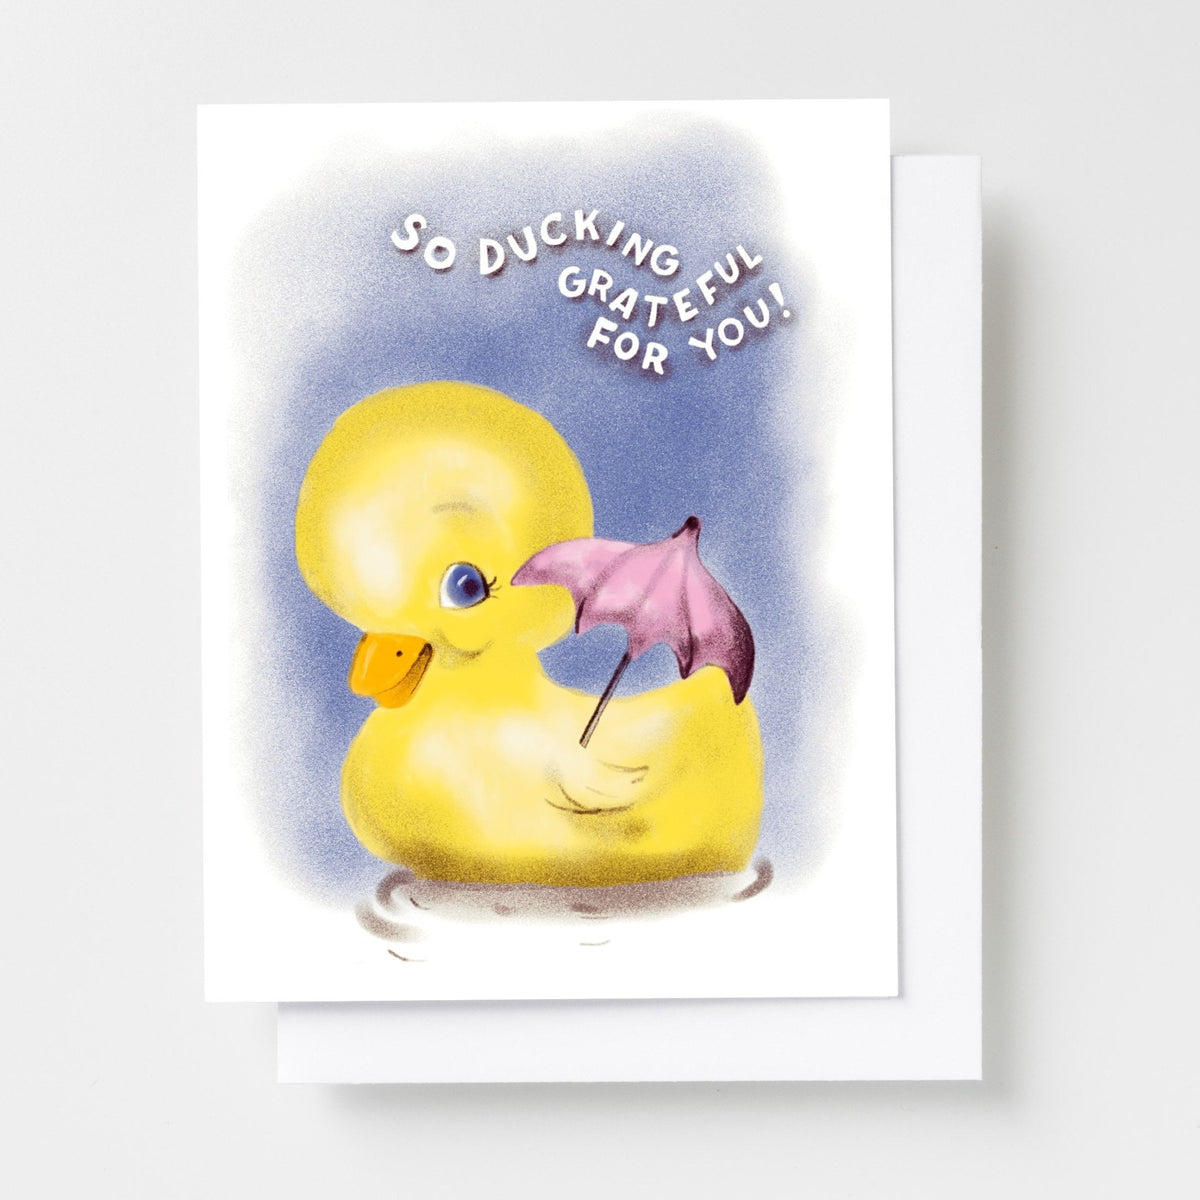 So Ducking Grateful For You! - Risograph Card Set - Yellow Owl Workshop